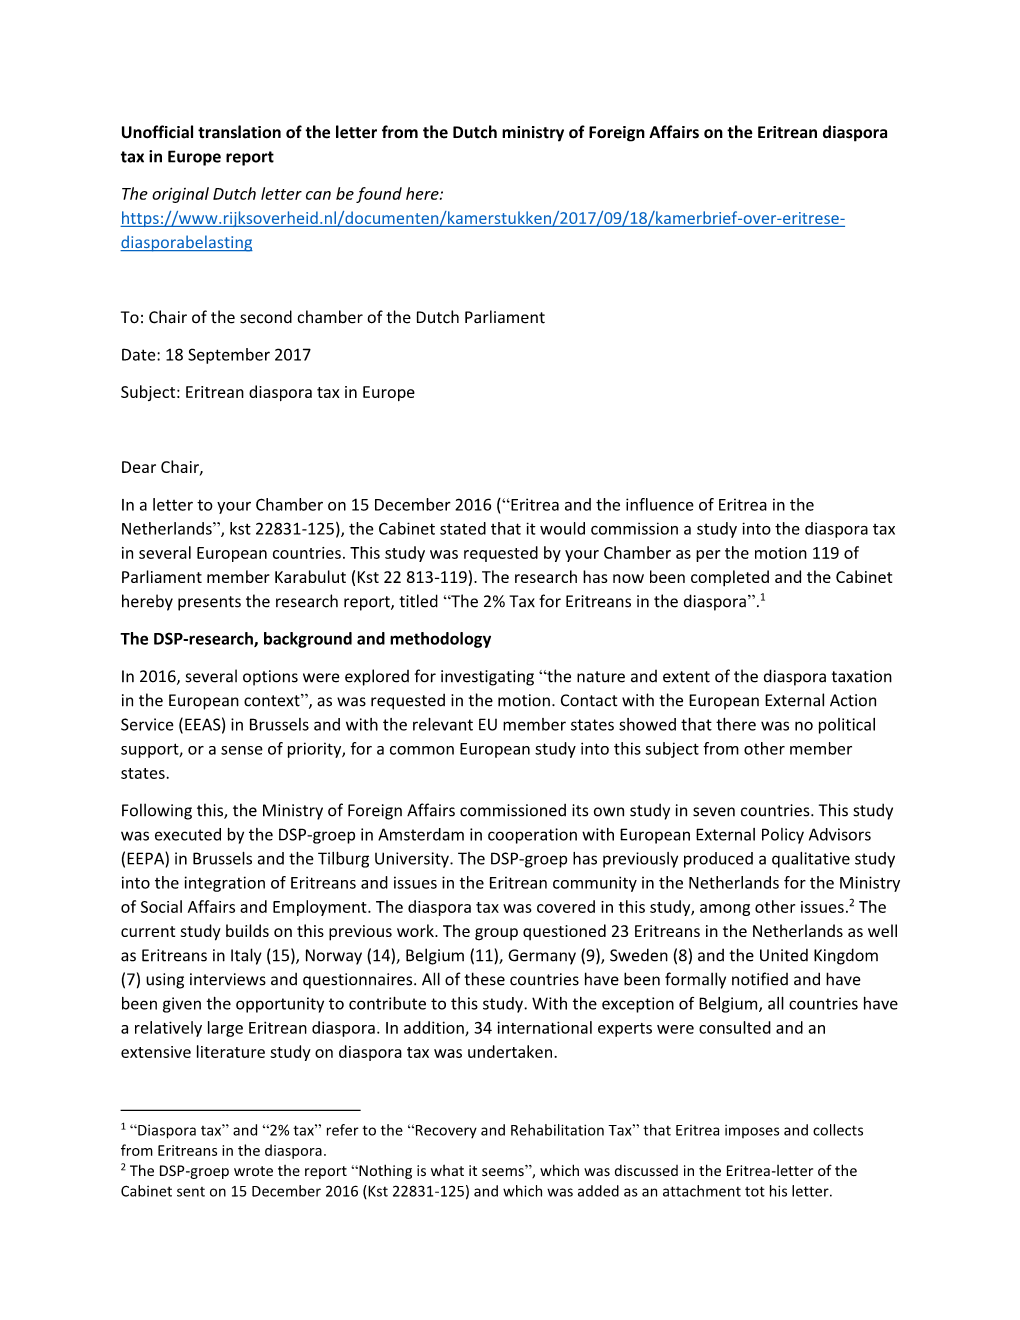 Unofficial Translation of the Letter from the Dutch Ministry of Foreign Affairs on the Eritrean Diaspora Tax in Europe Report